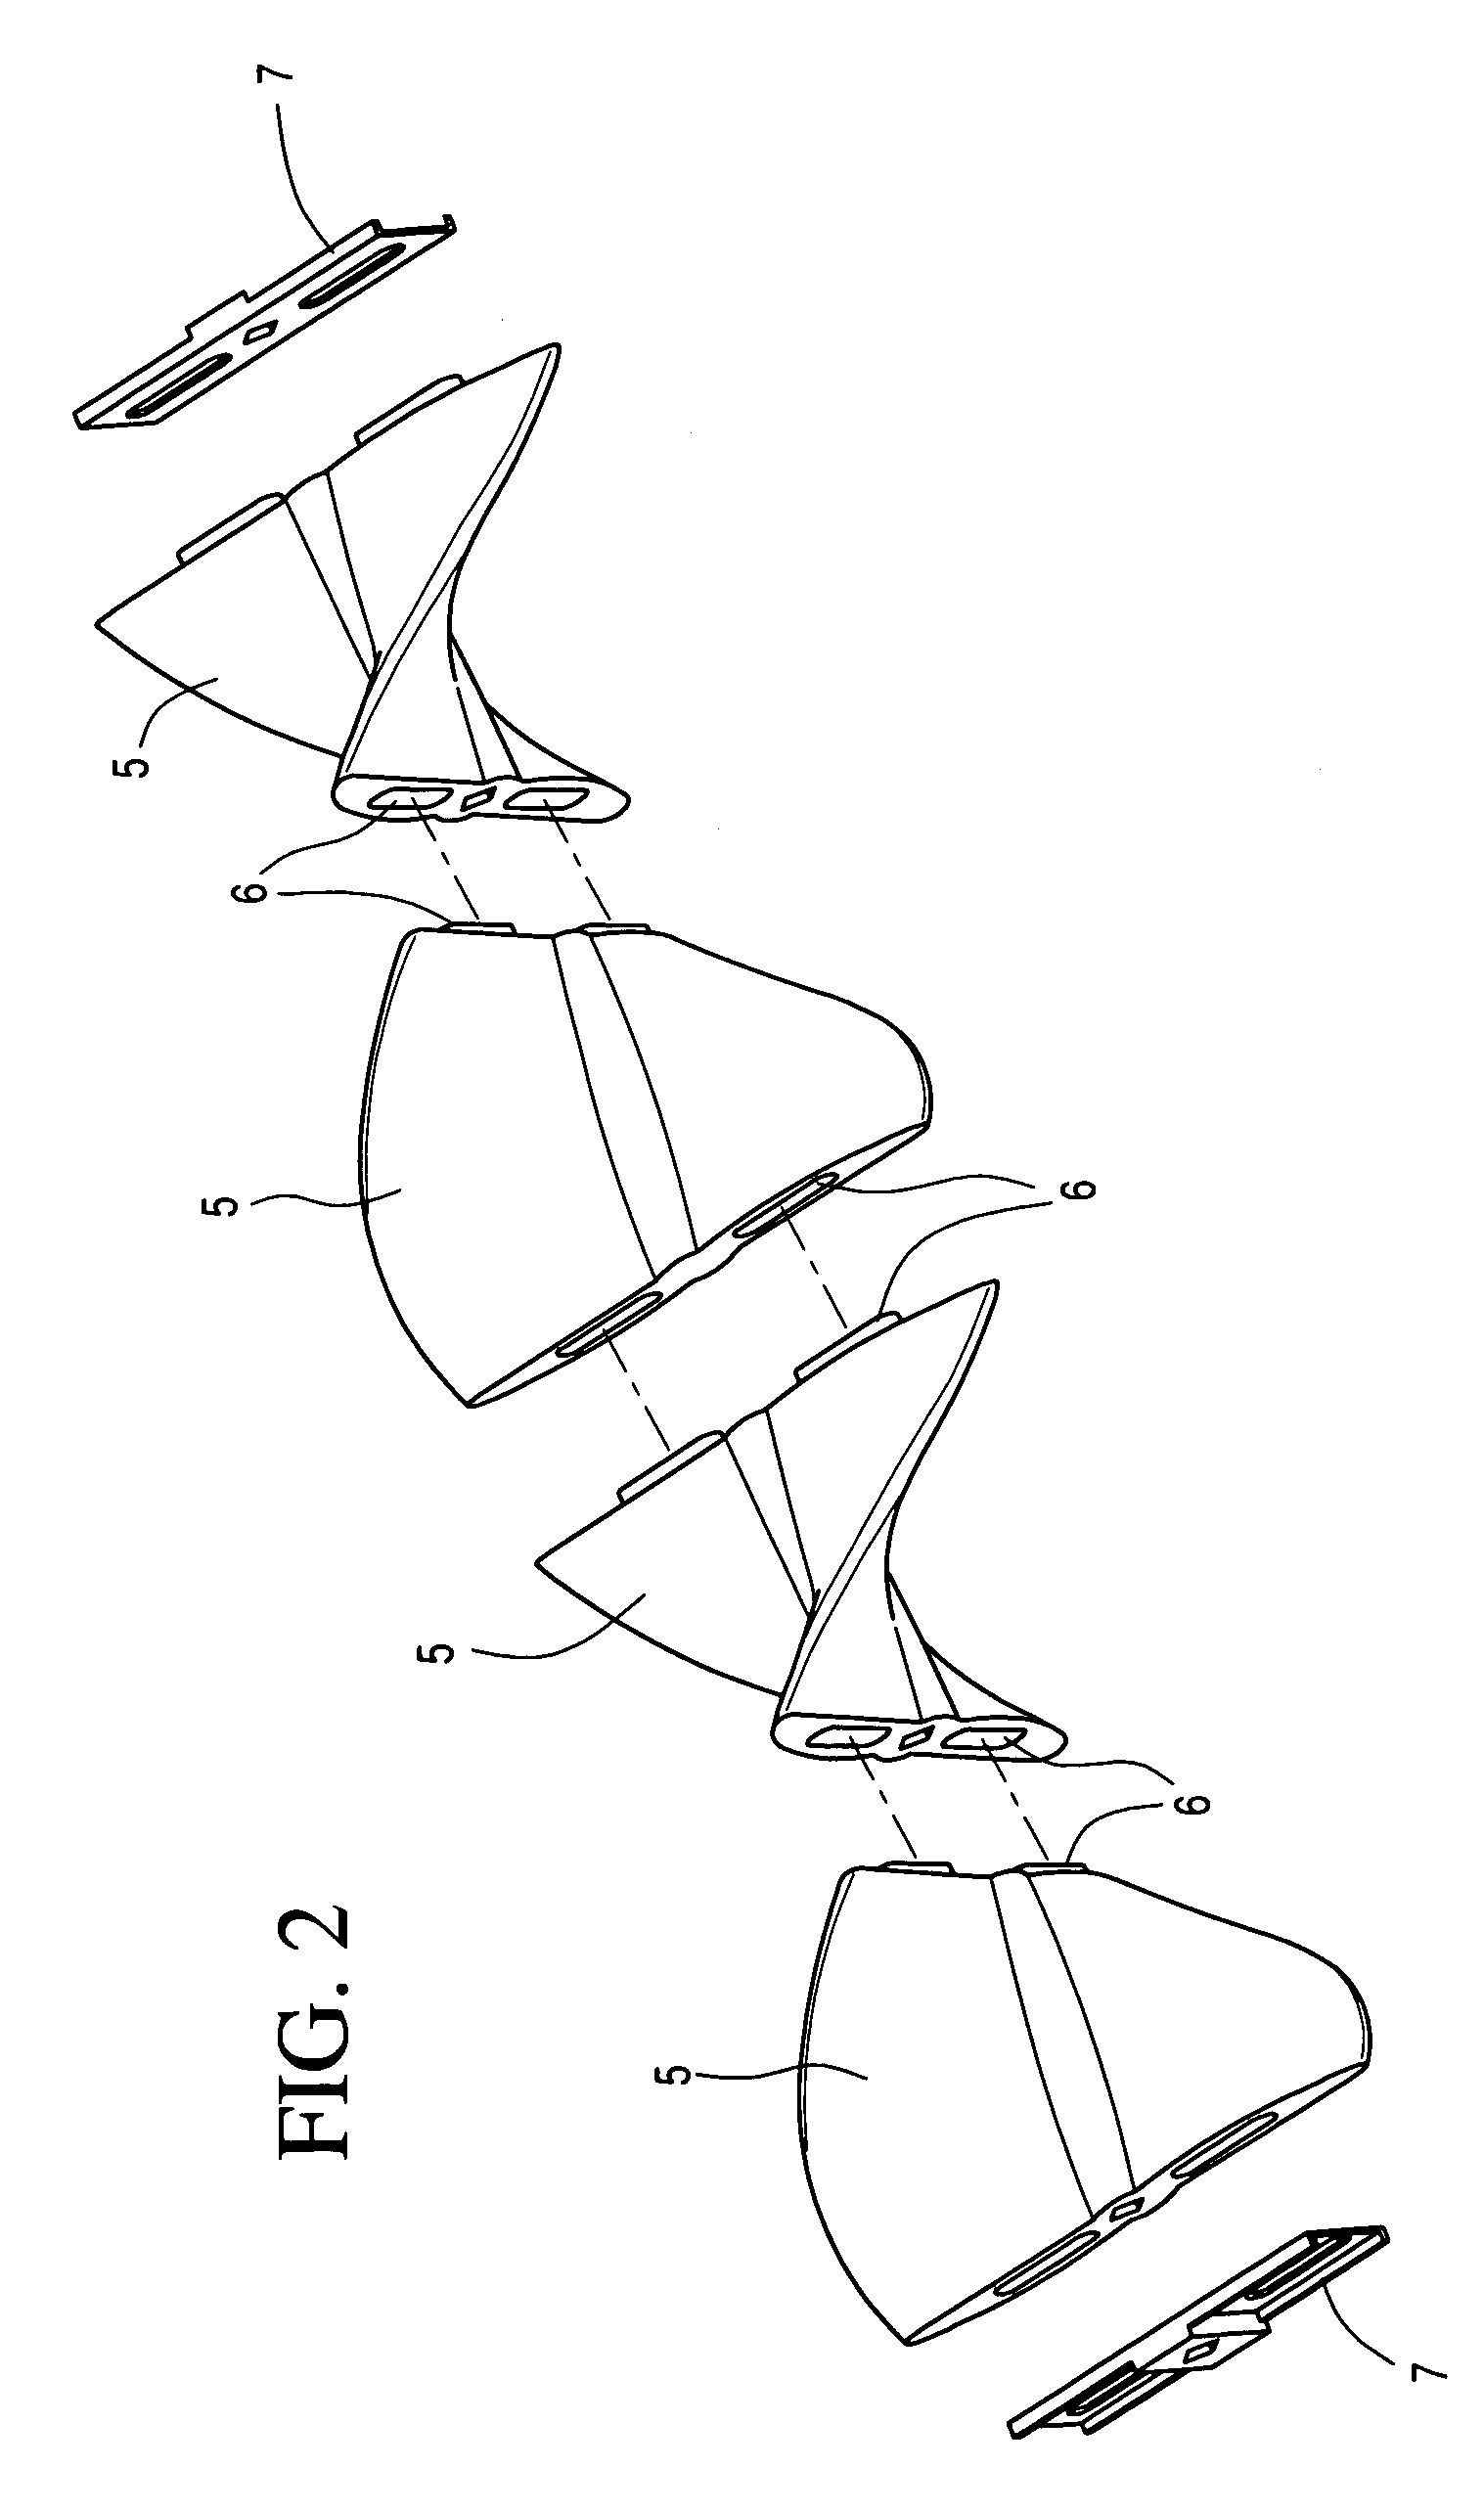 Helical airfoil wind turbines